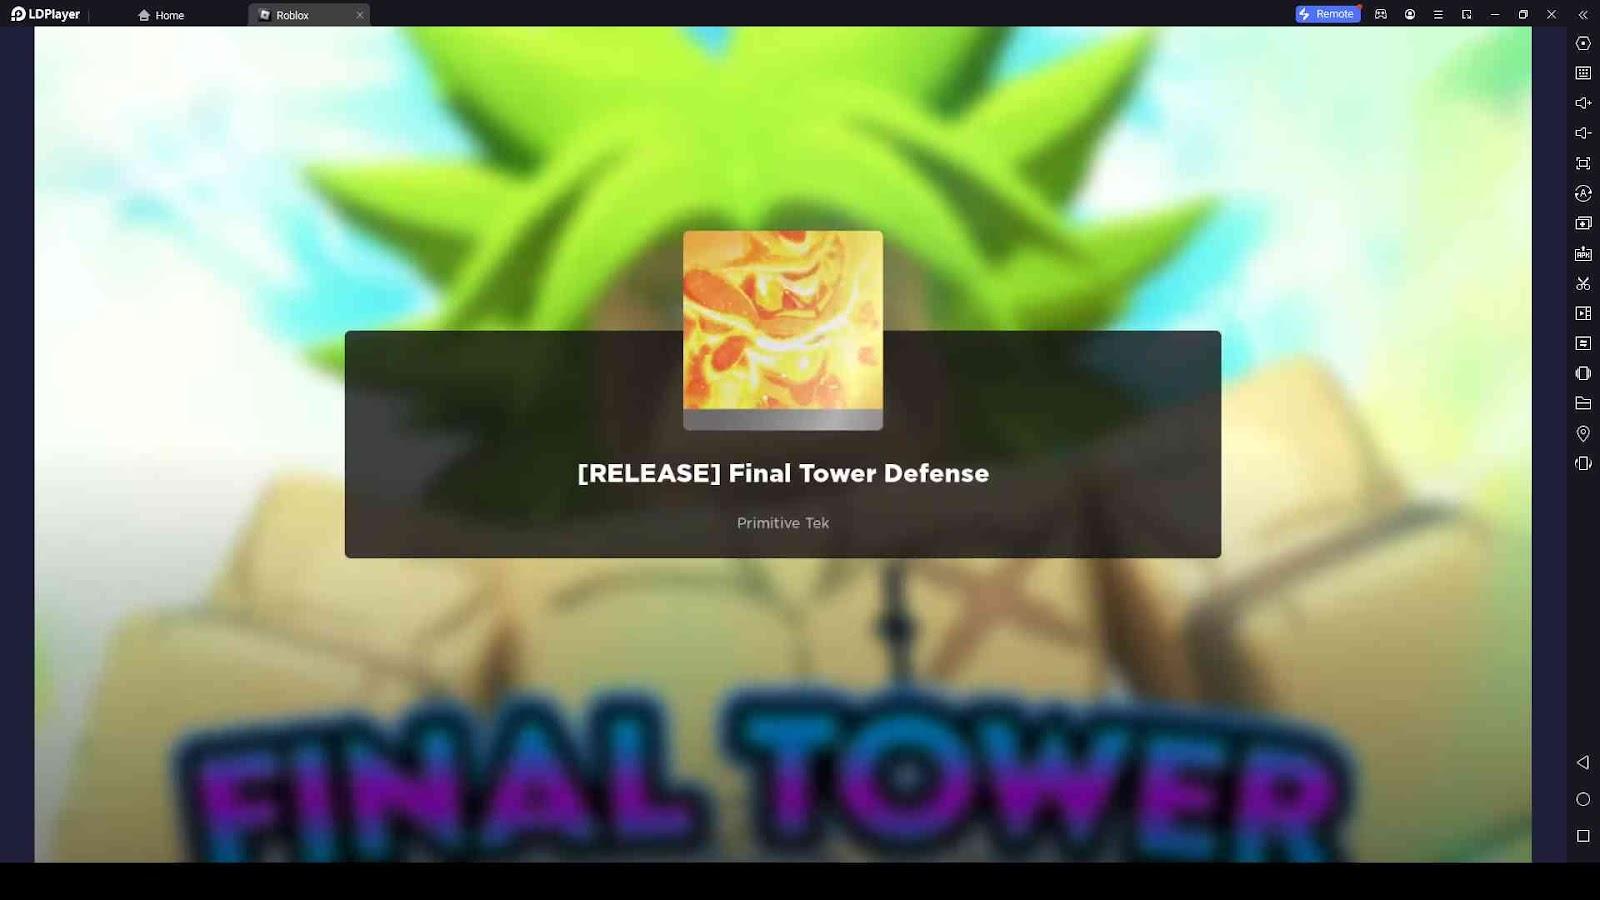 NEW* ALL WORKING ULTIMATE TOWER DEFENSE CODES IN NOVEMBER 2023 - ROBLOX ULTIMATE  TOWER DEFENSE 